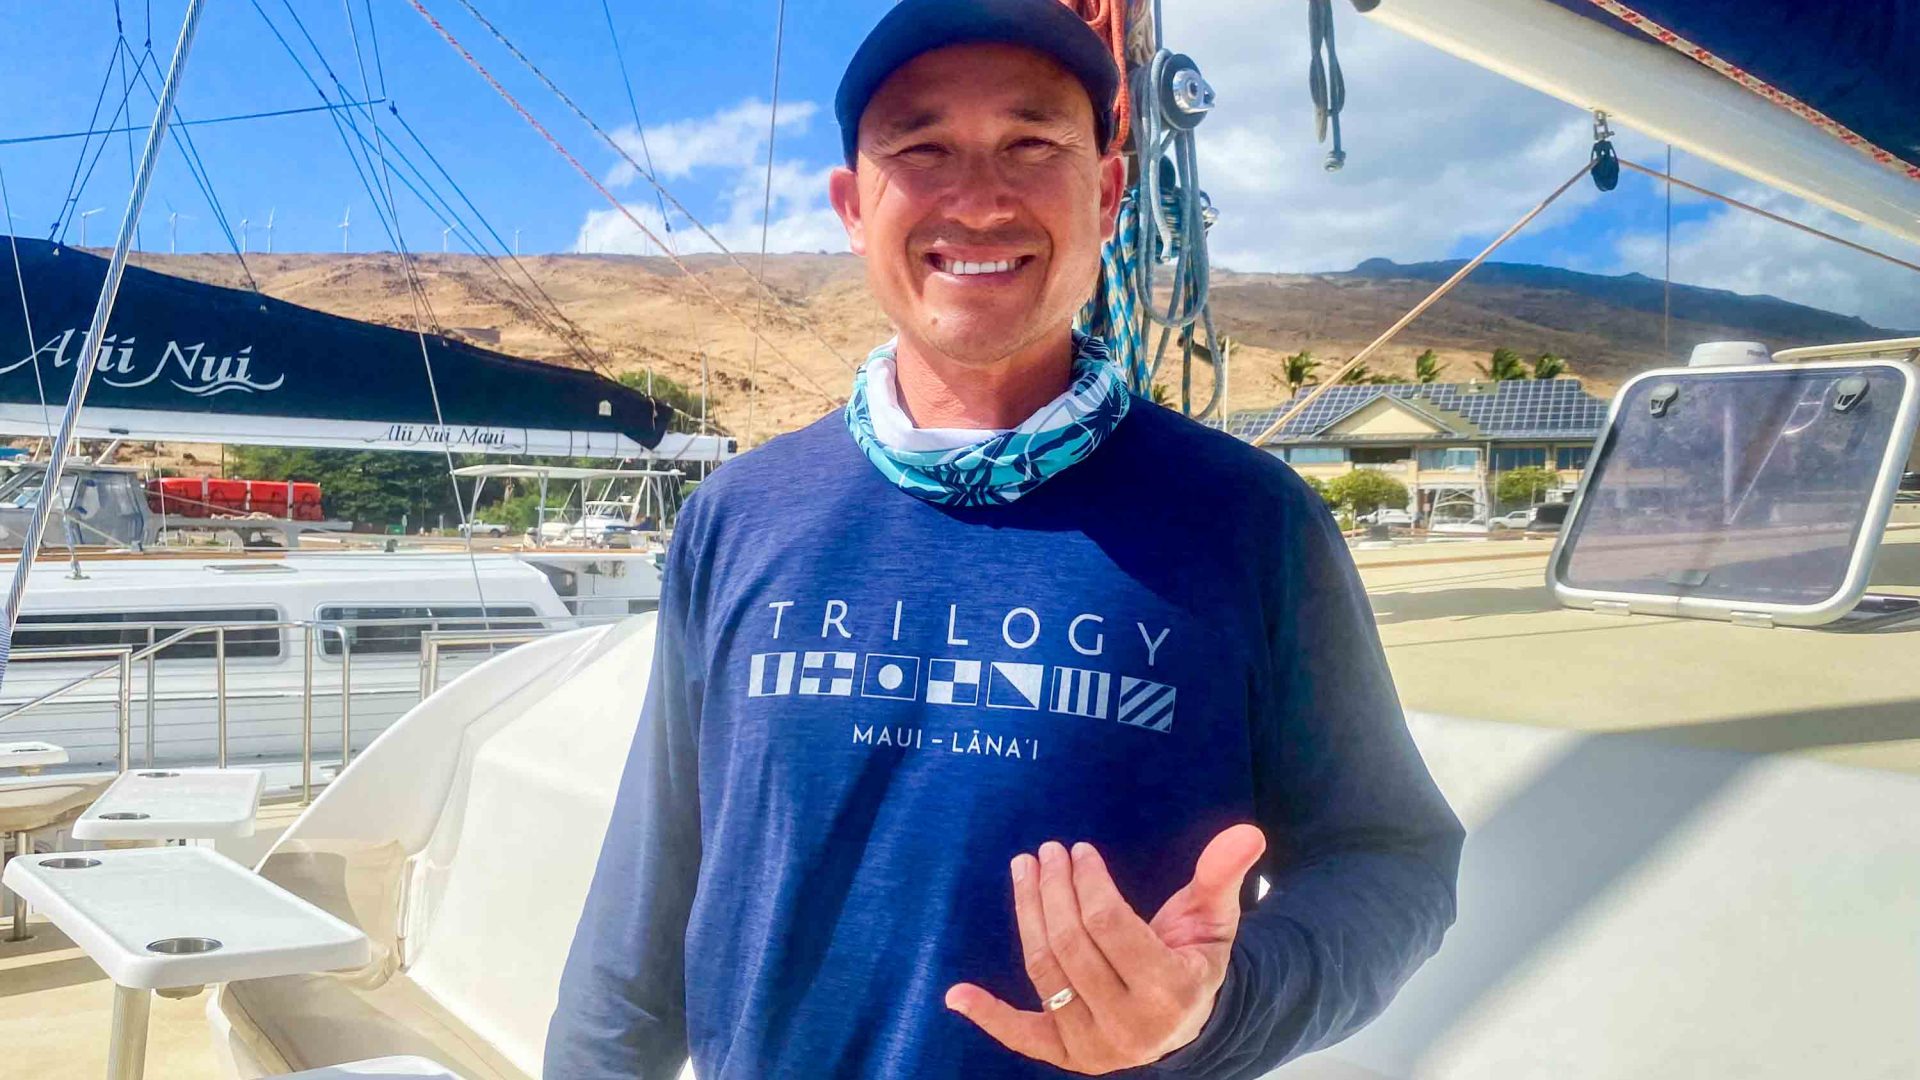 Riley wears a blue t shirt and smiles to camera. He is on a boat and wears a cap.